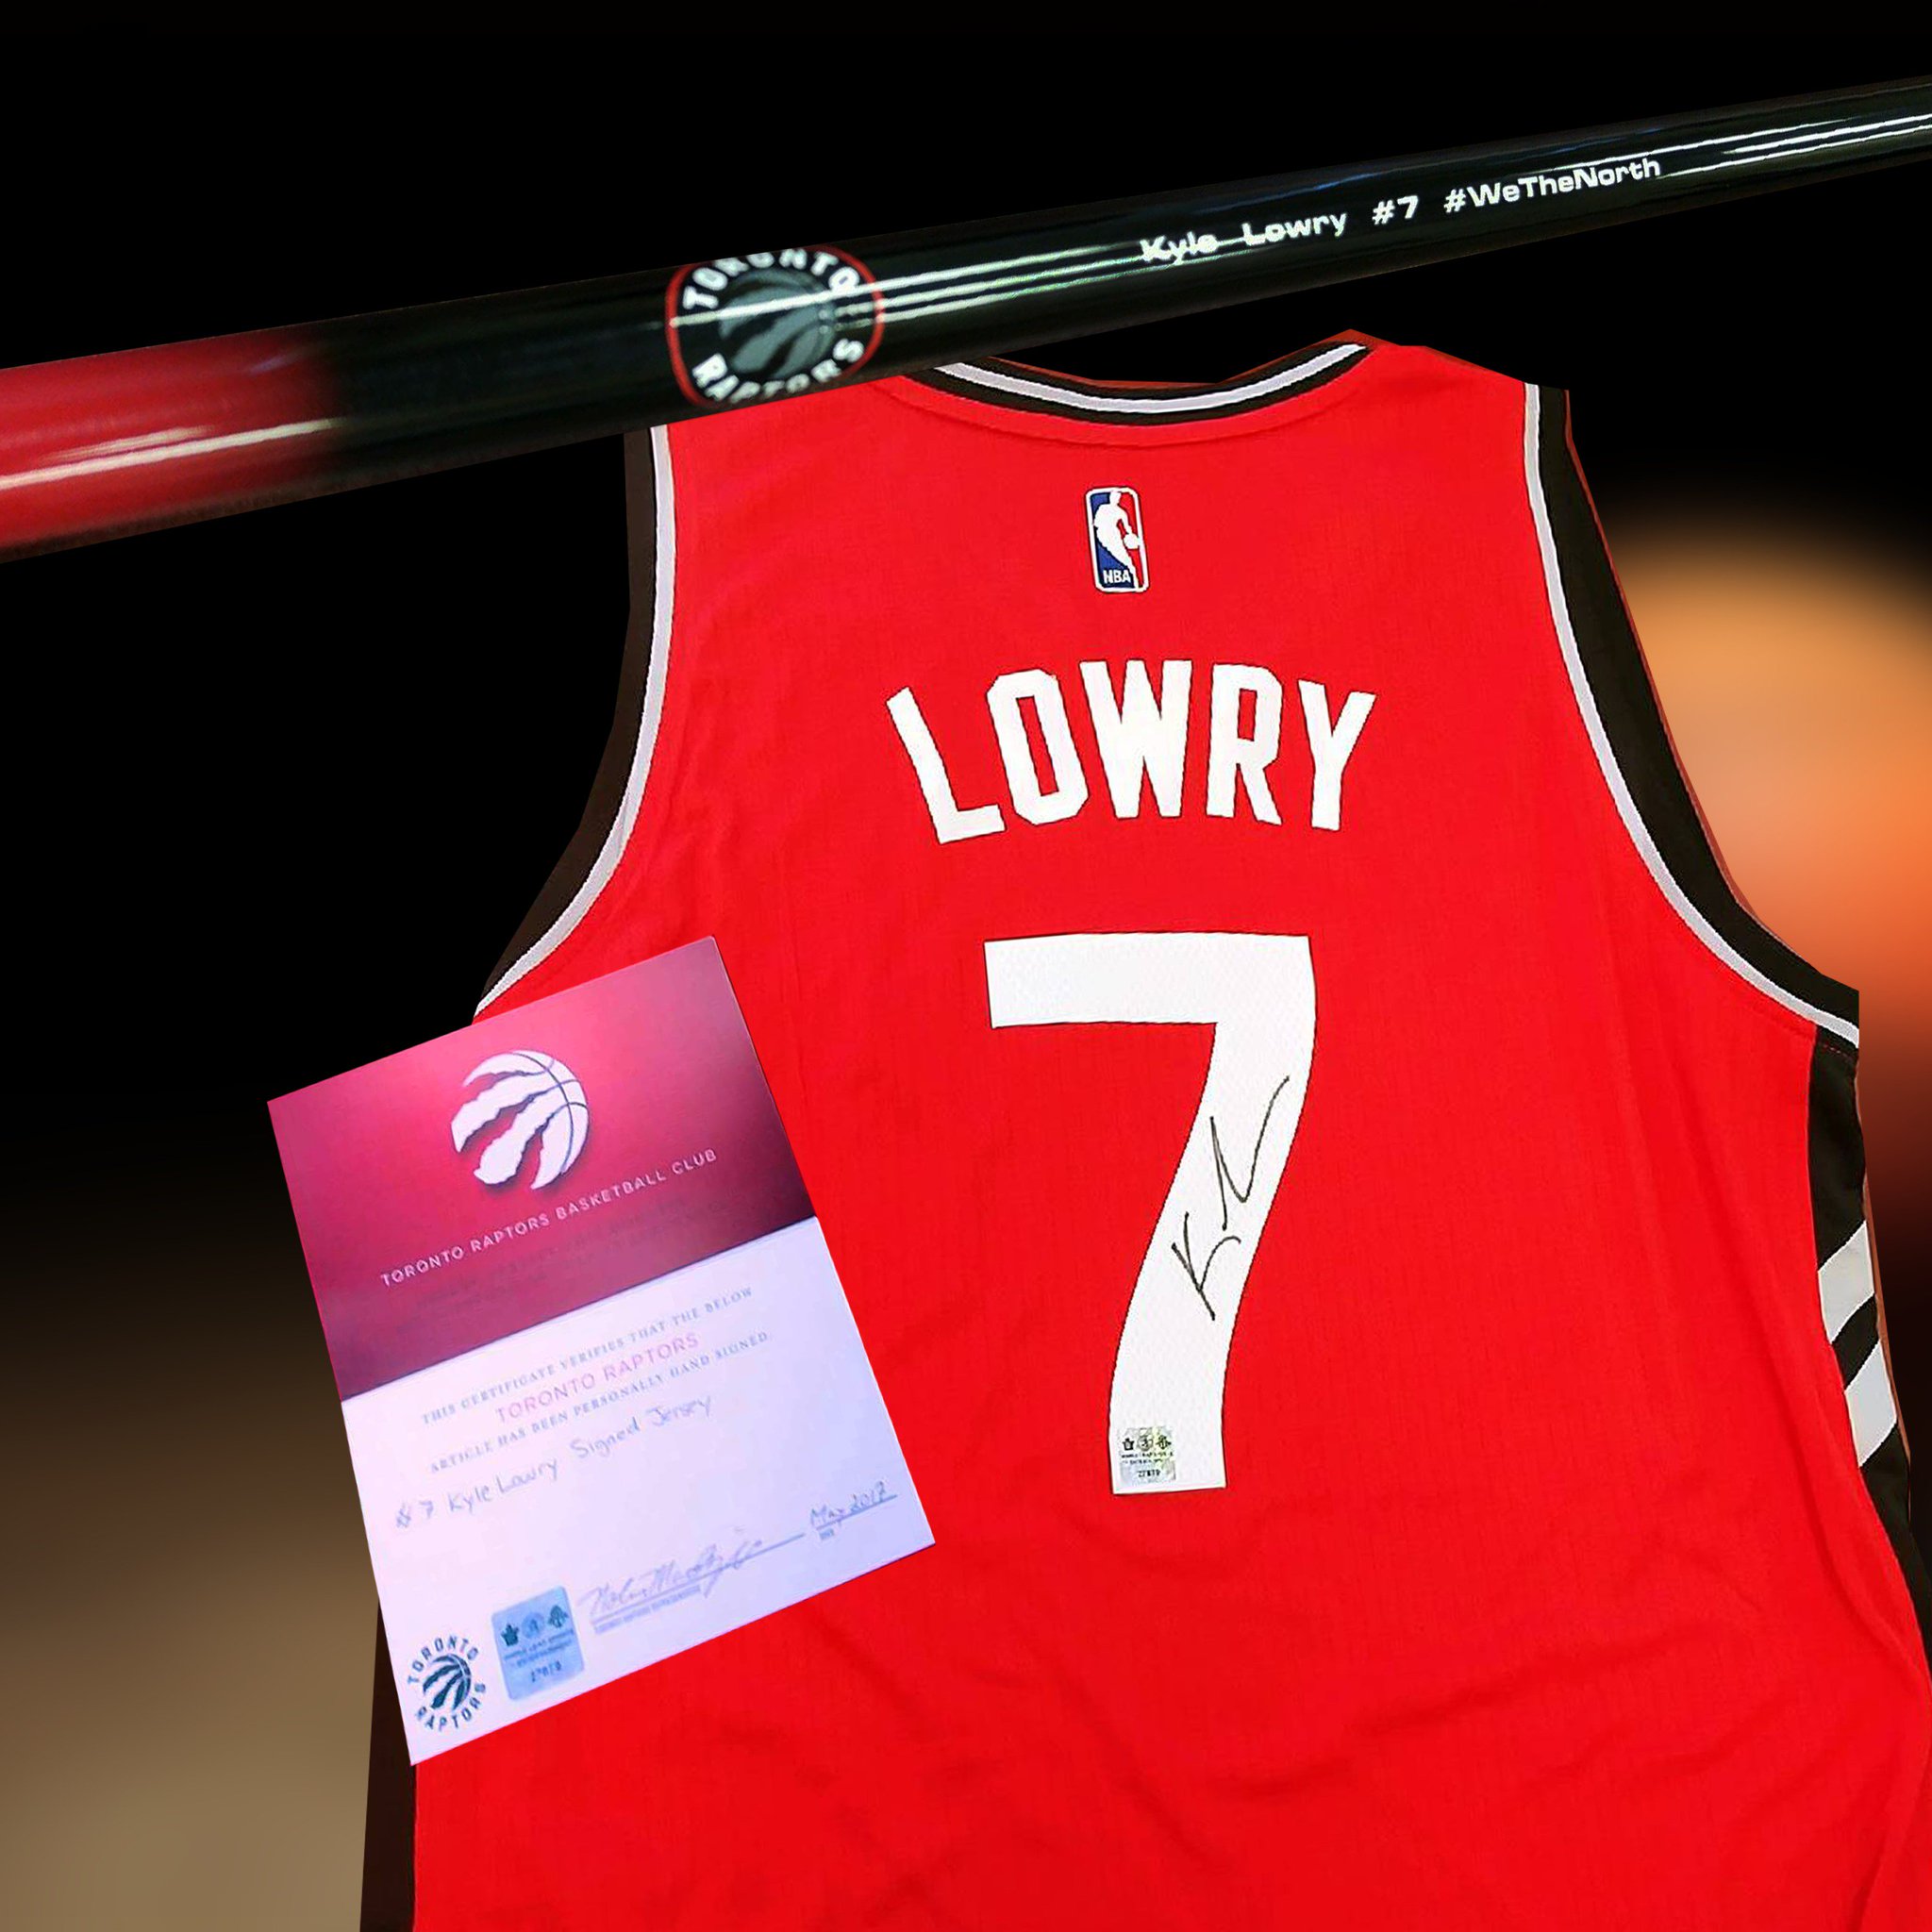 kyle lowry autographed jersey